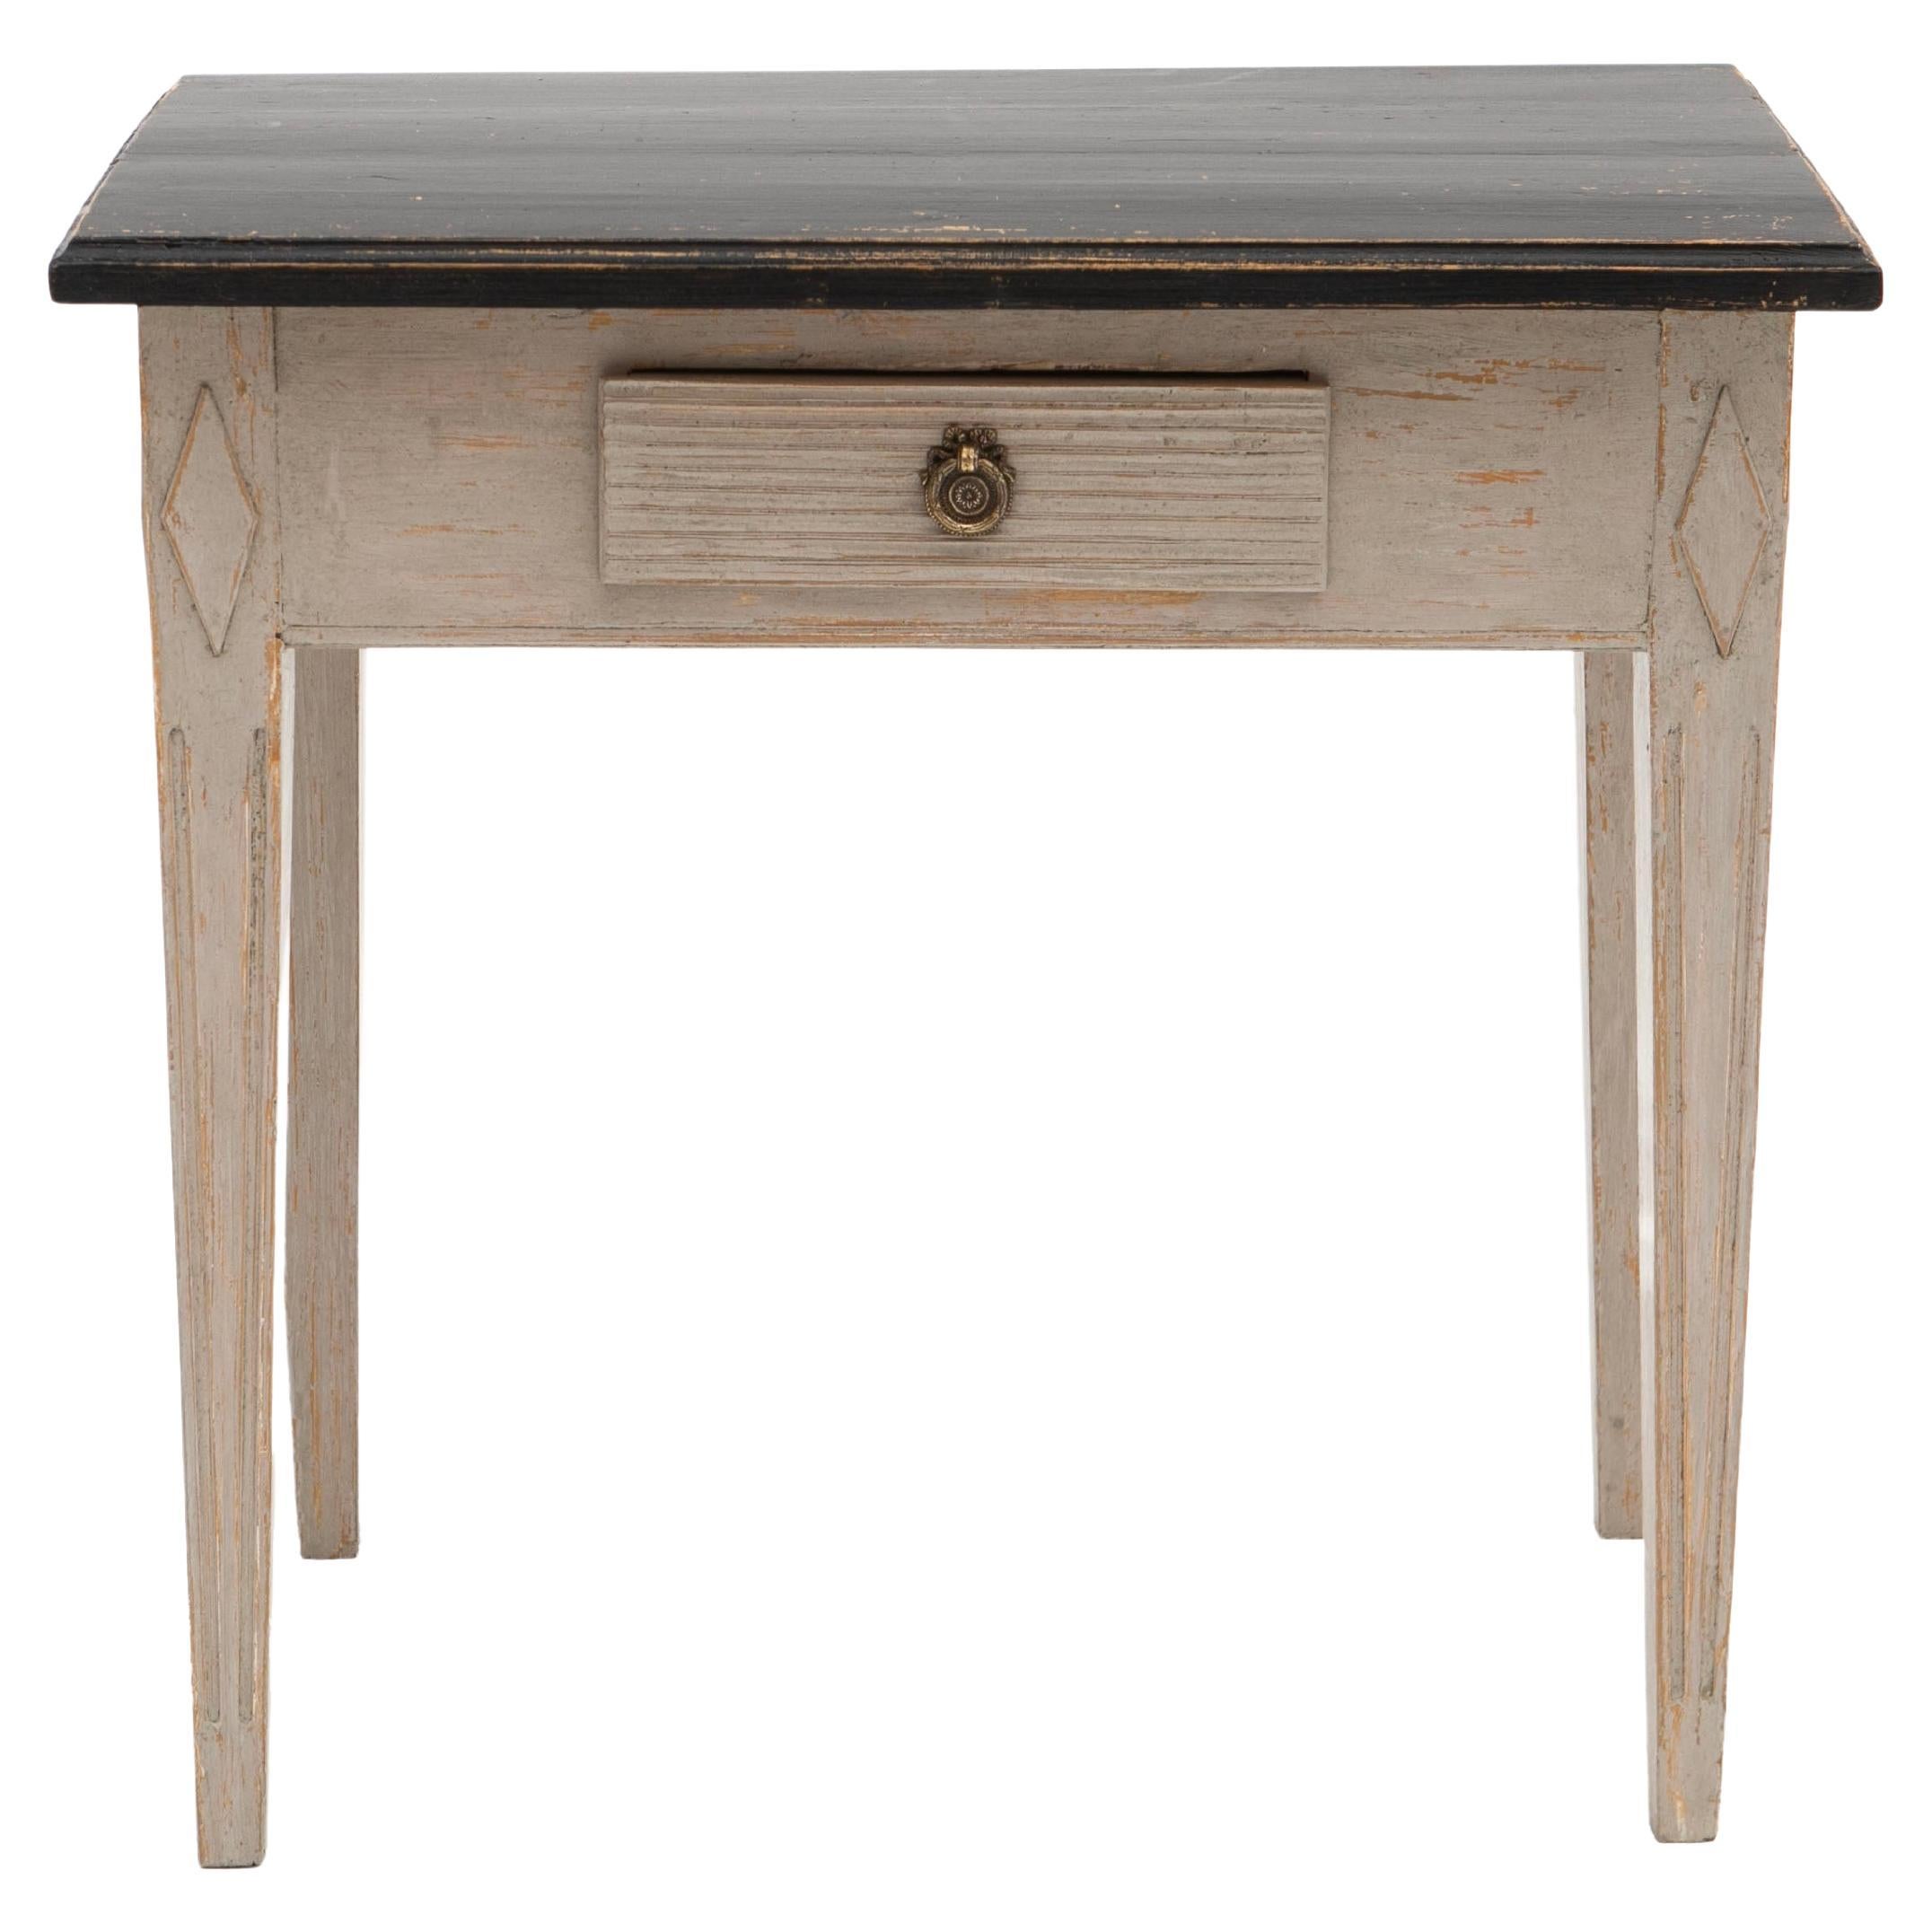 Small Swedish Early 19th Century Gustavian Table / Console Table For Sale